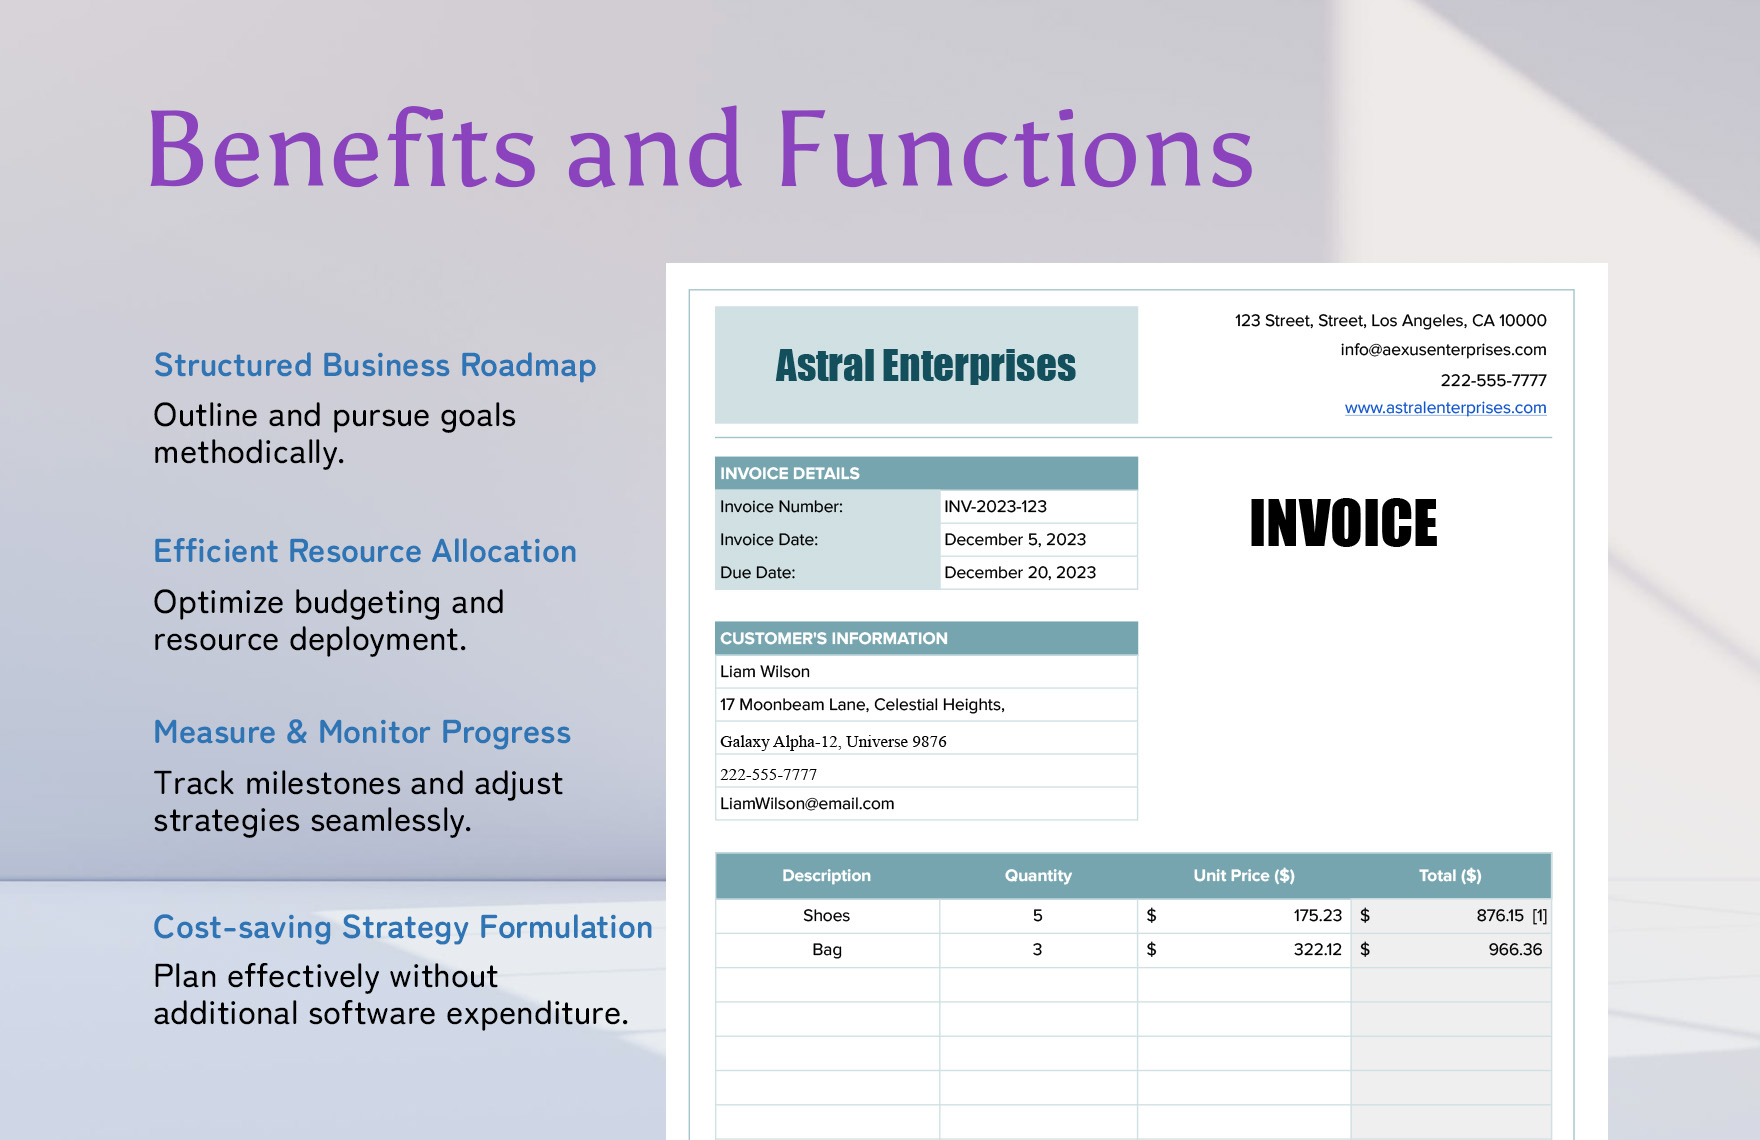 Product Invoice Template